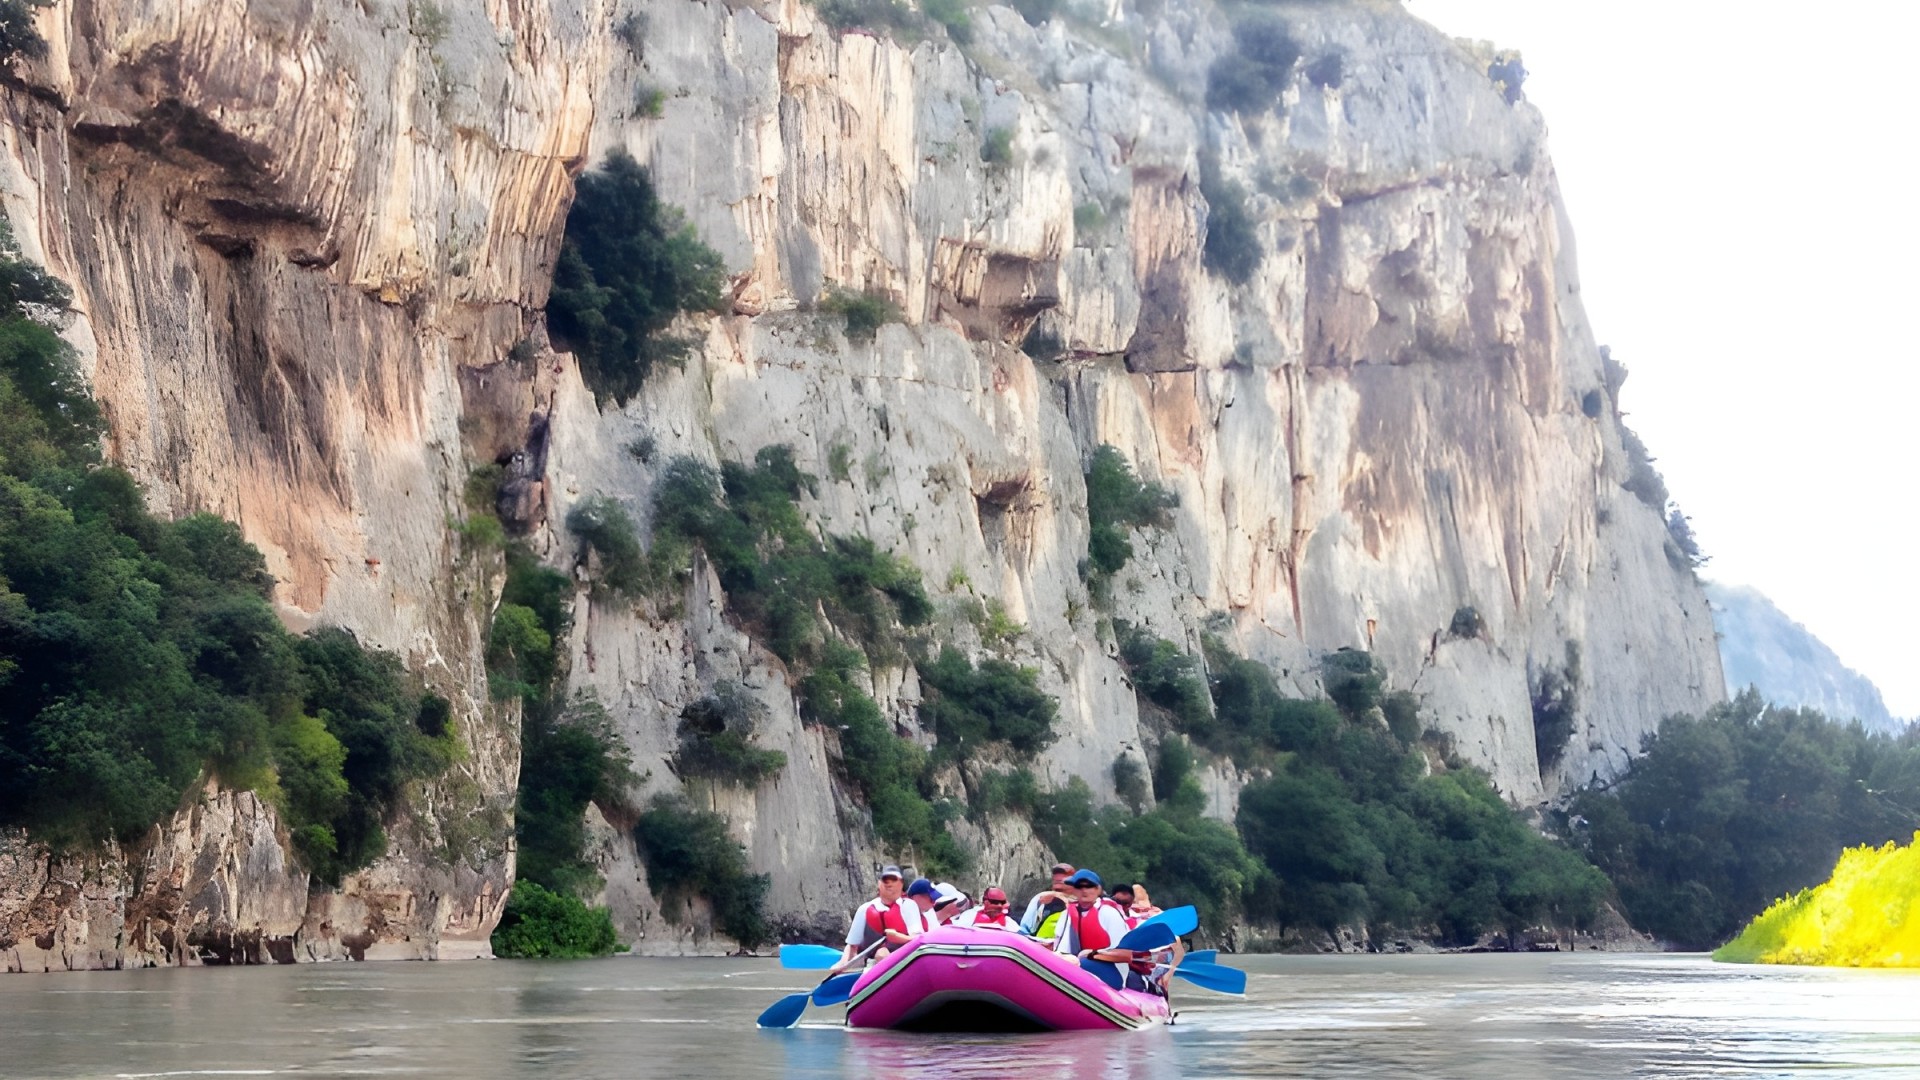 Afternoon Rafting on the Adige River: From Dolcè to Volargne